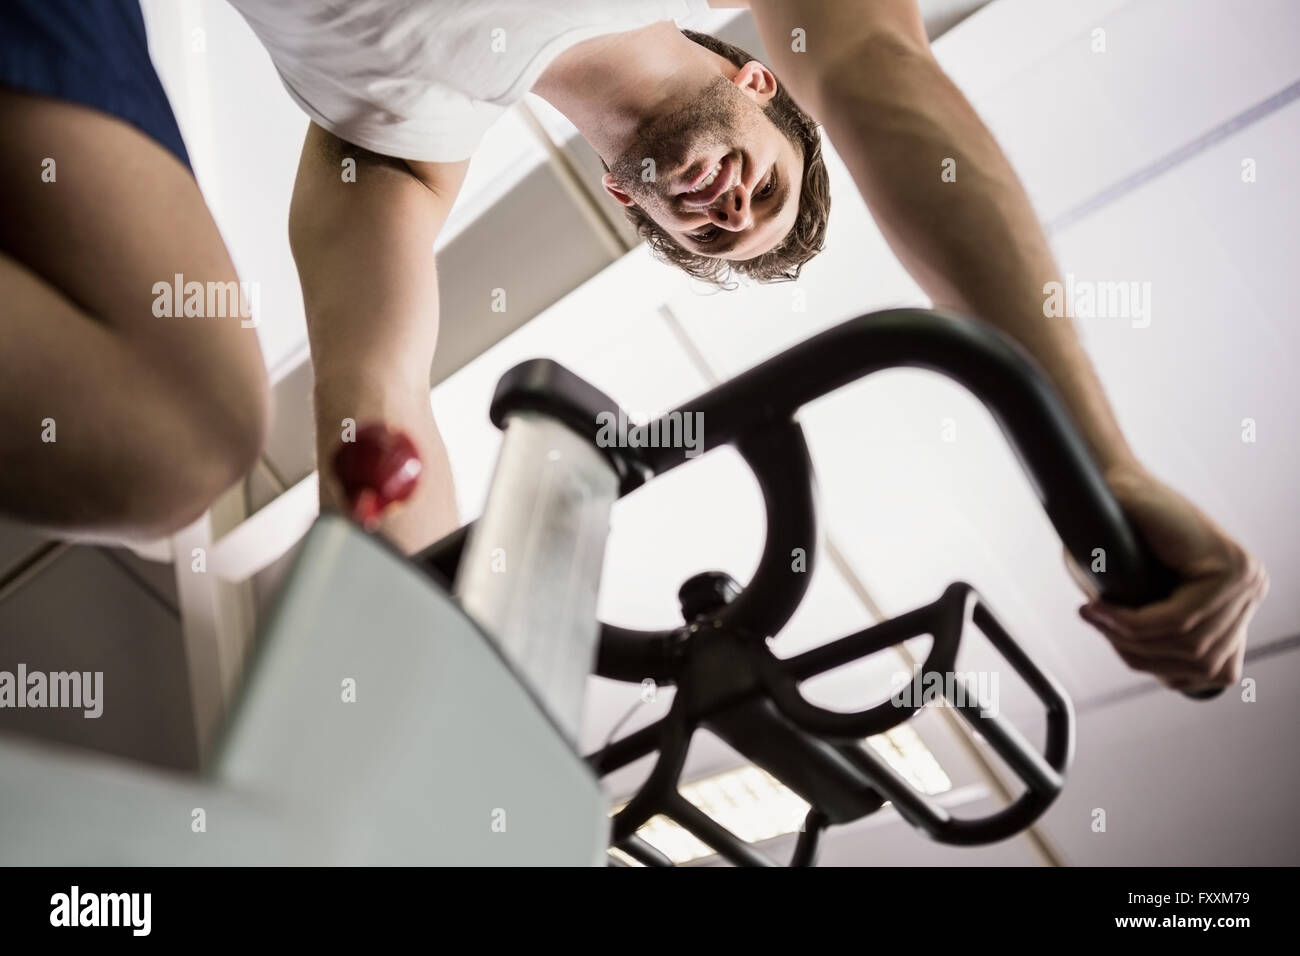 Man working out on exercise bike at spinning class Banque D'Images